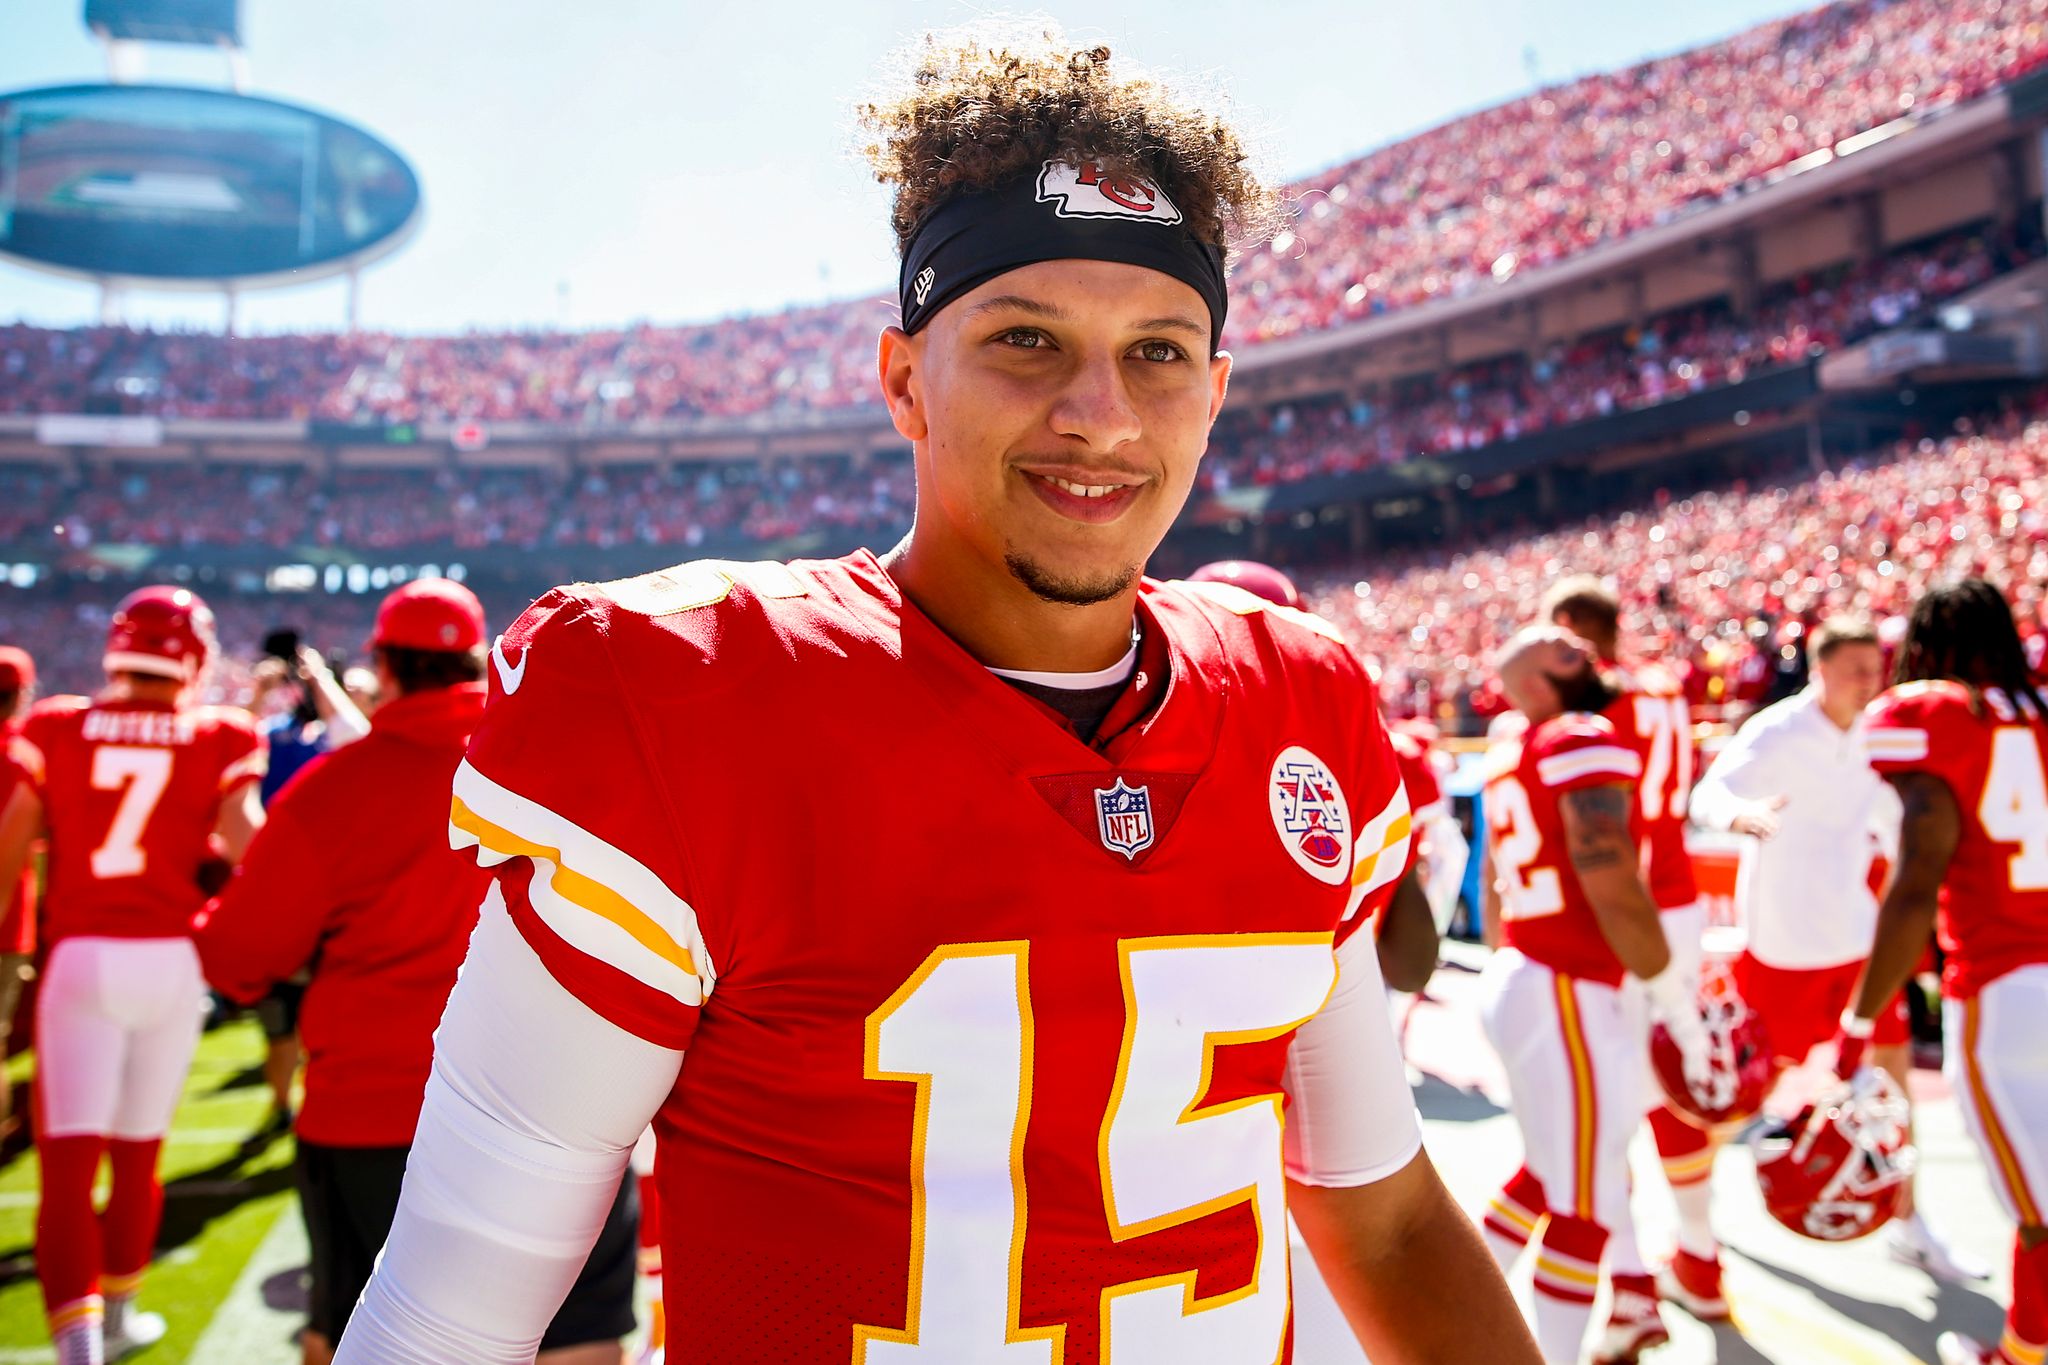 Patrick Mahomes' Parents — Glimpse inside the Highest-Paid NFL Player's Family